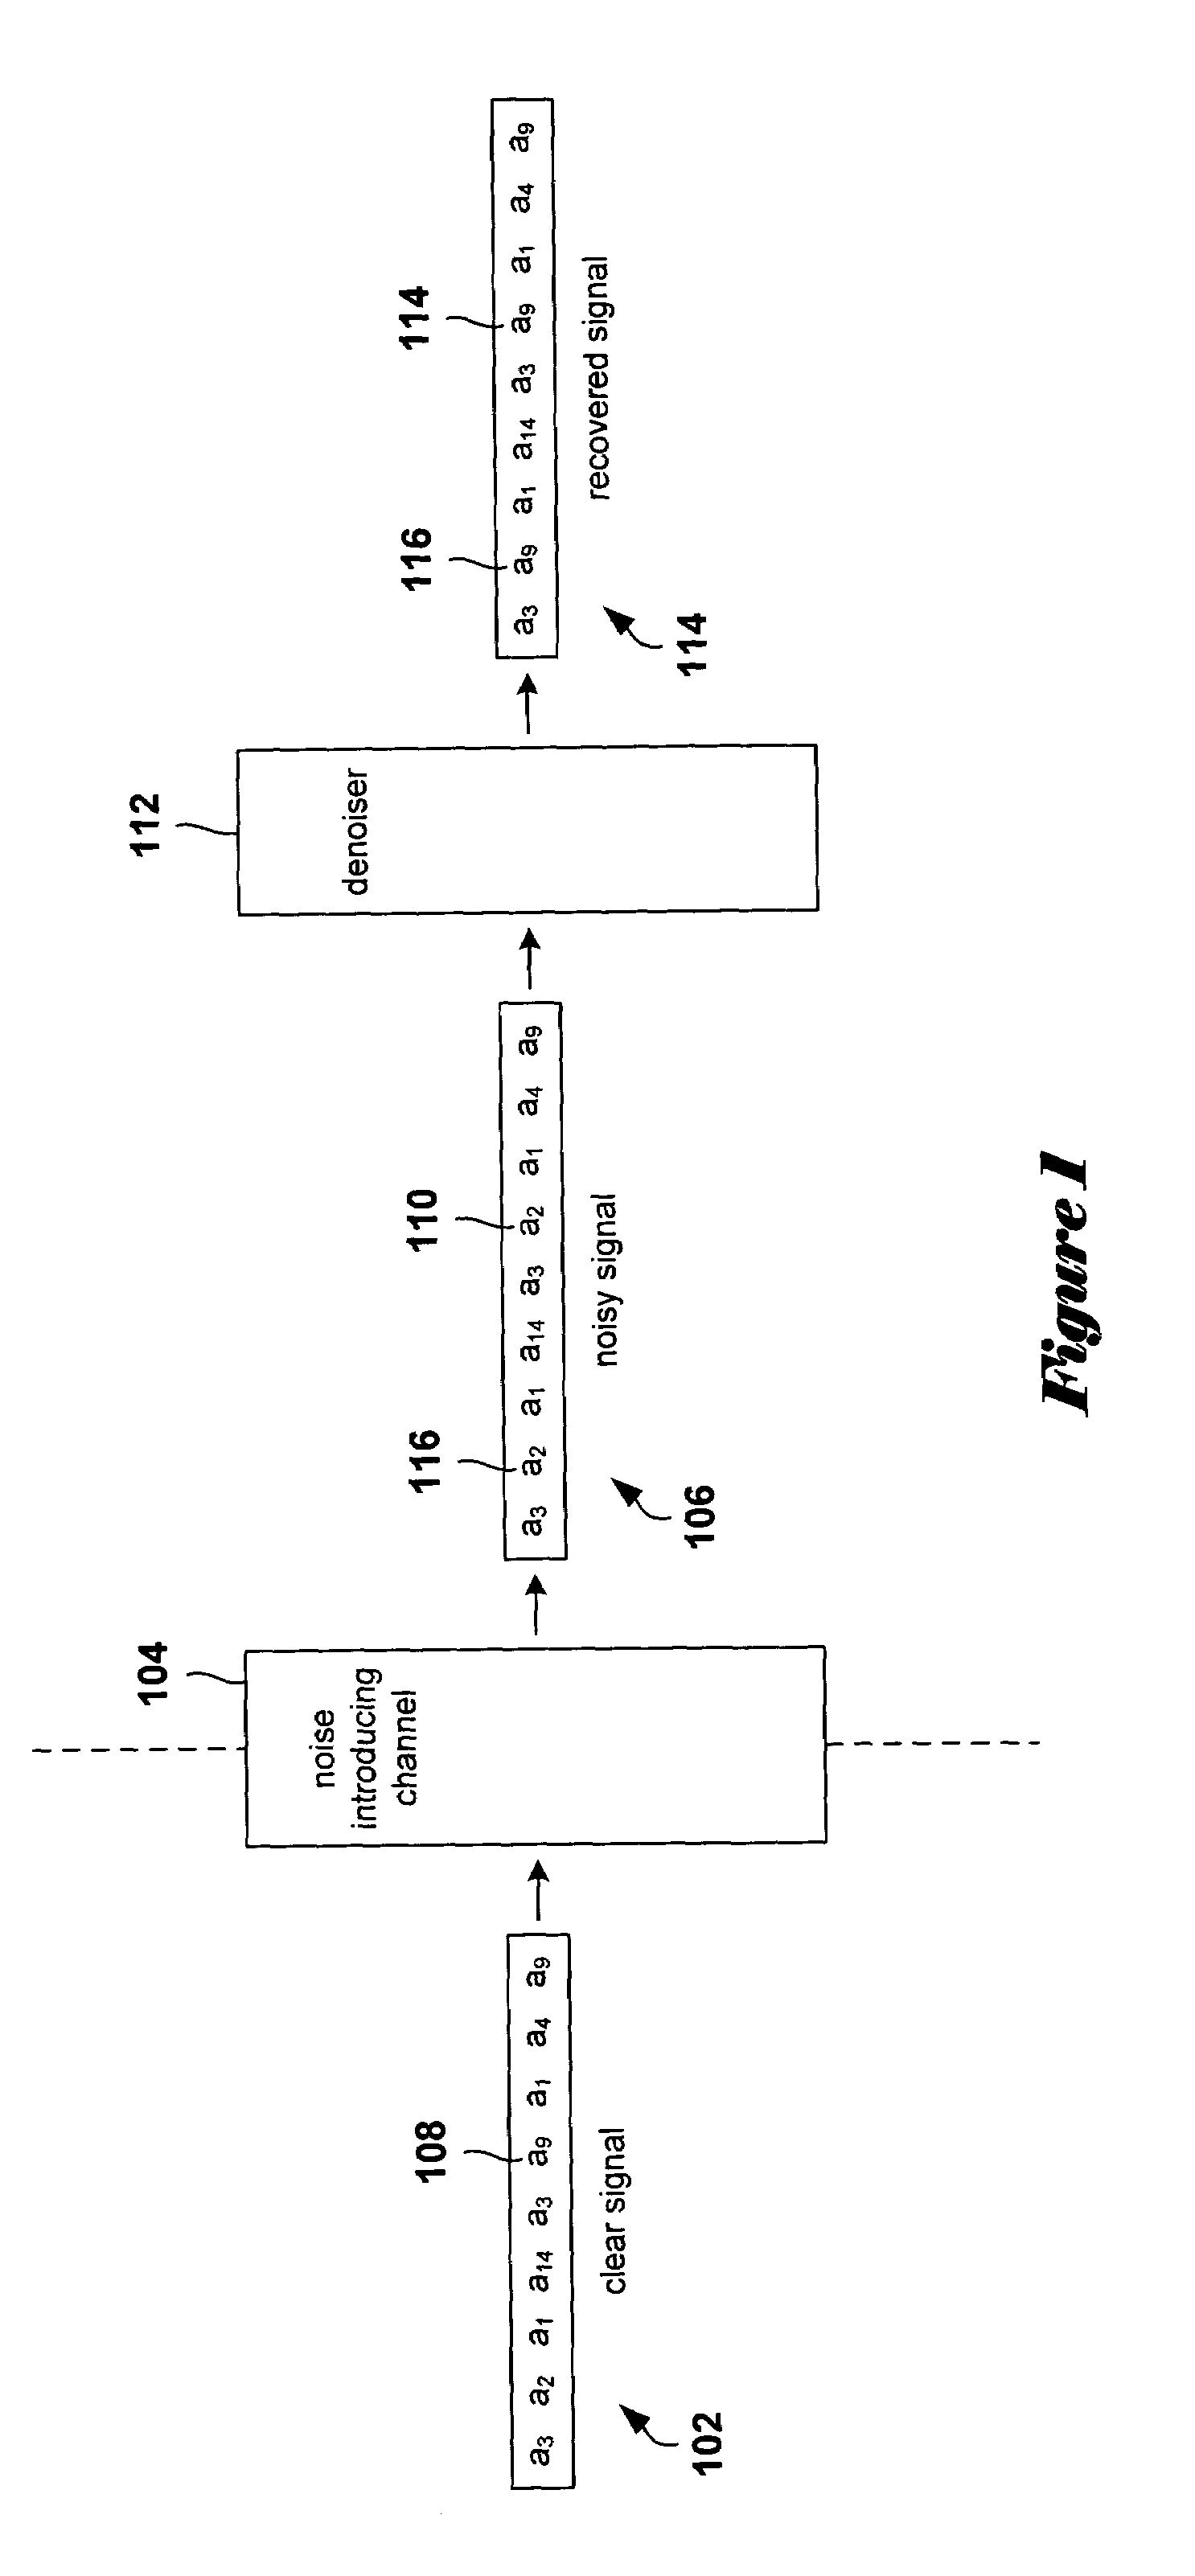 Method and system for determining an optimal or near optimal set of contexts by constructing a multi-directional context tree